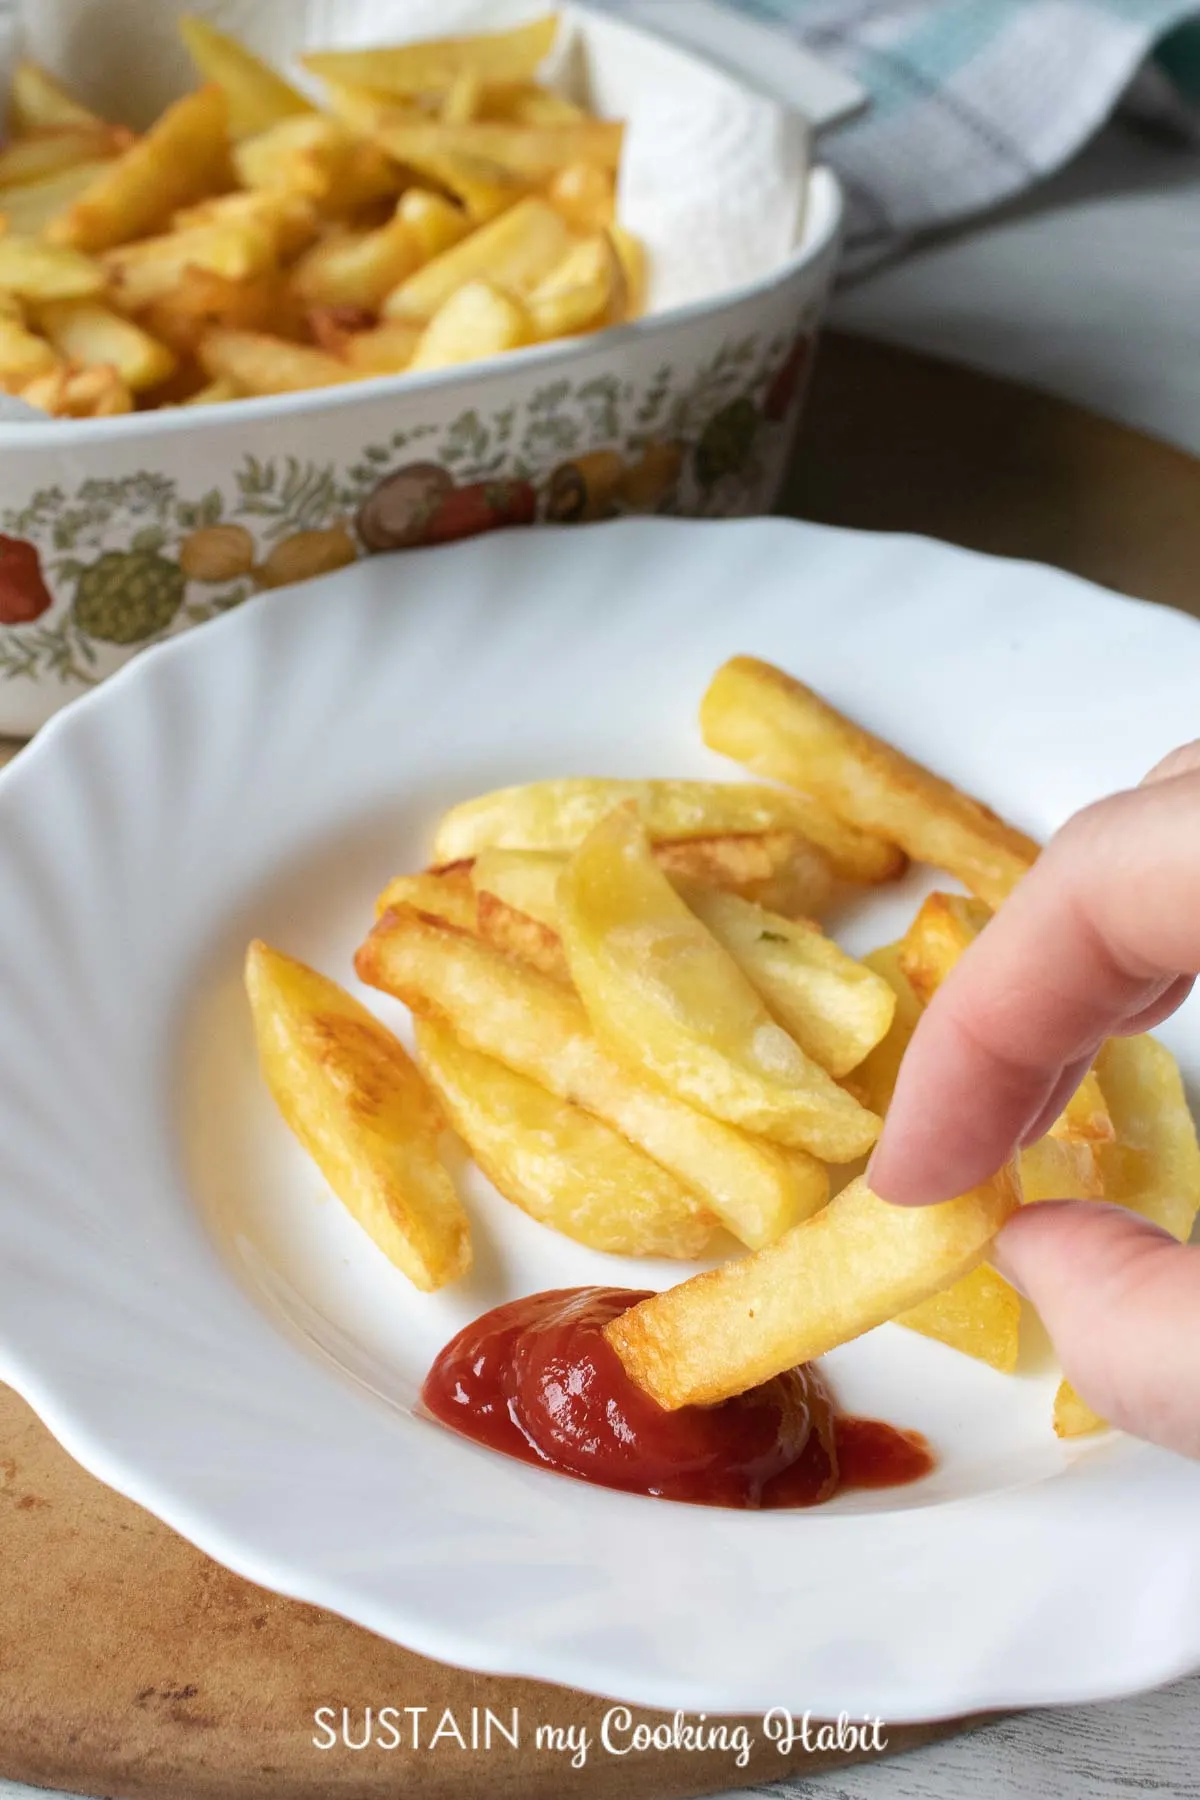 Hand dipping one french fry into ketchup.